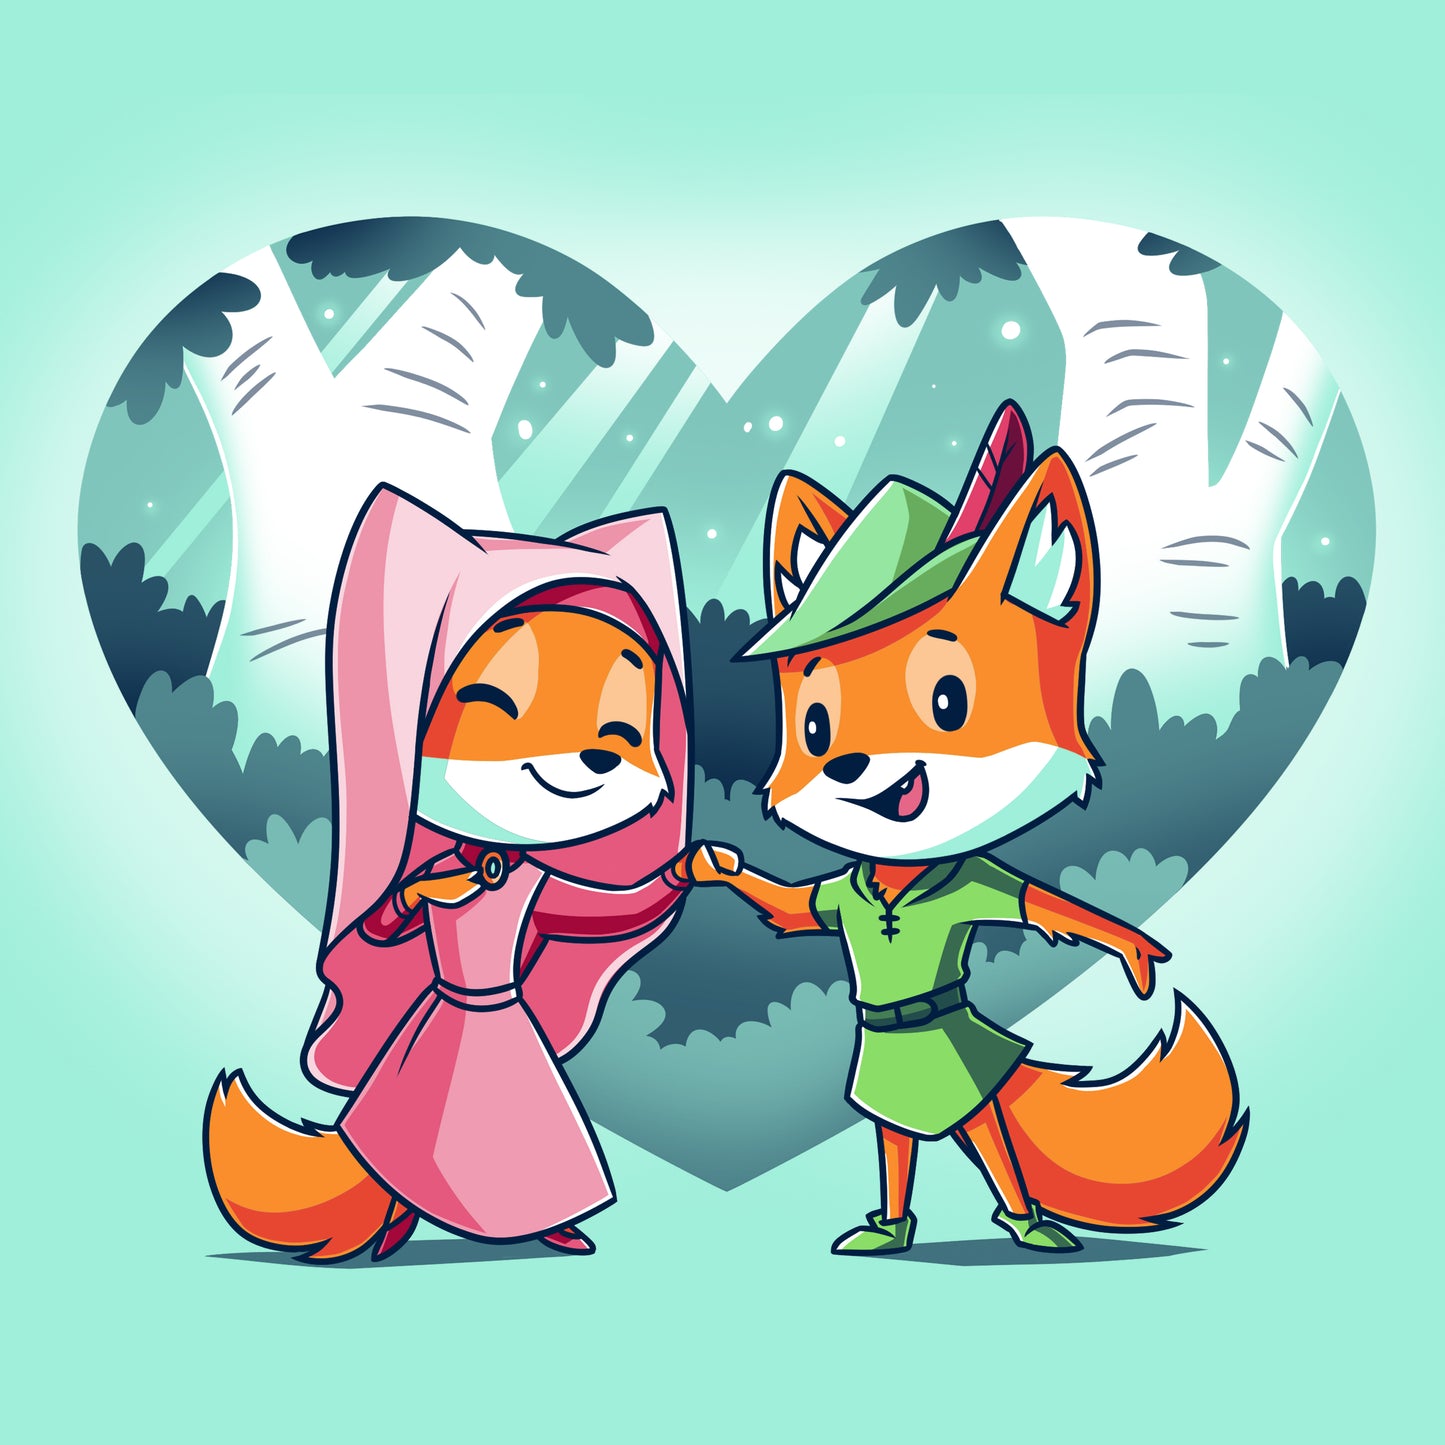 A Disney-licensed cartoon of Robin Hood and Maid Marian, a fox with a princess in a heart shape.